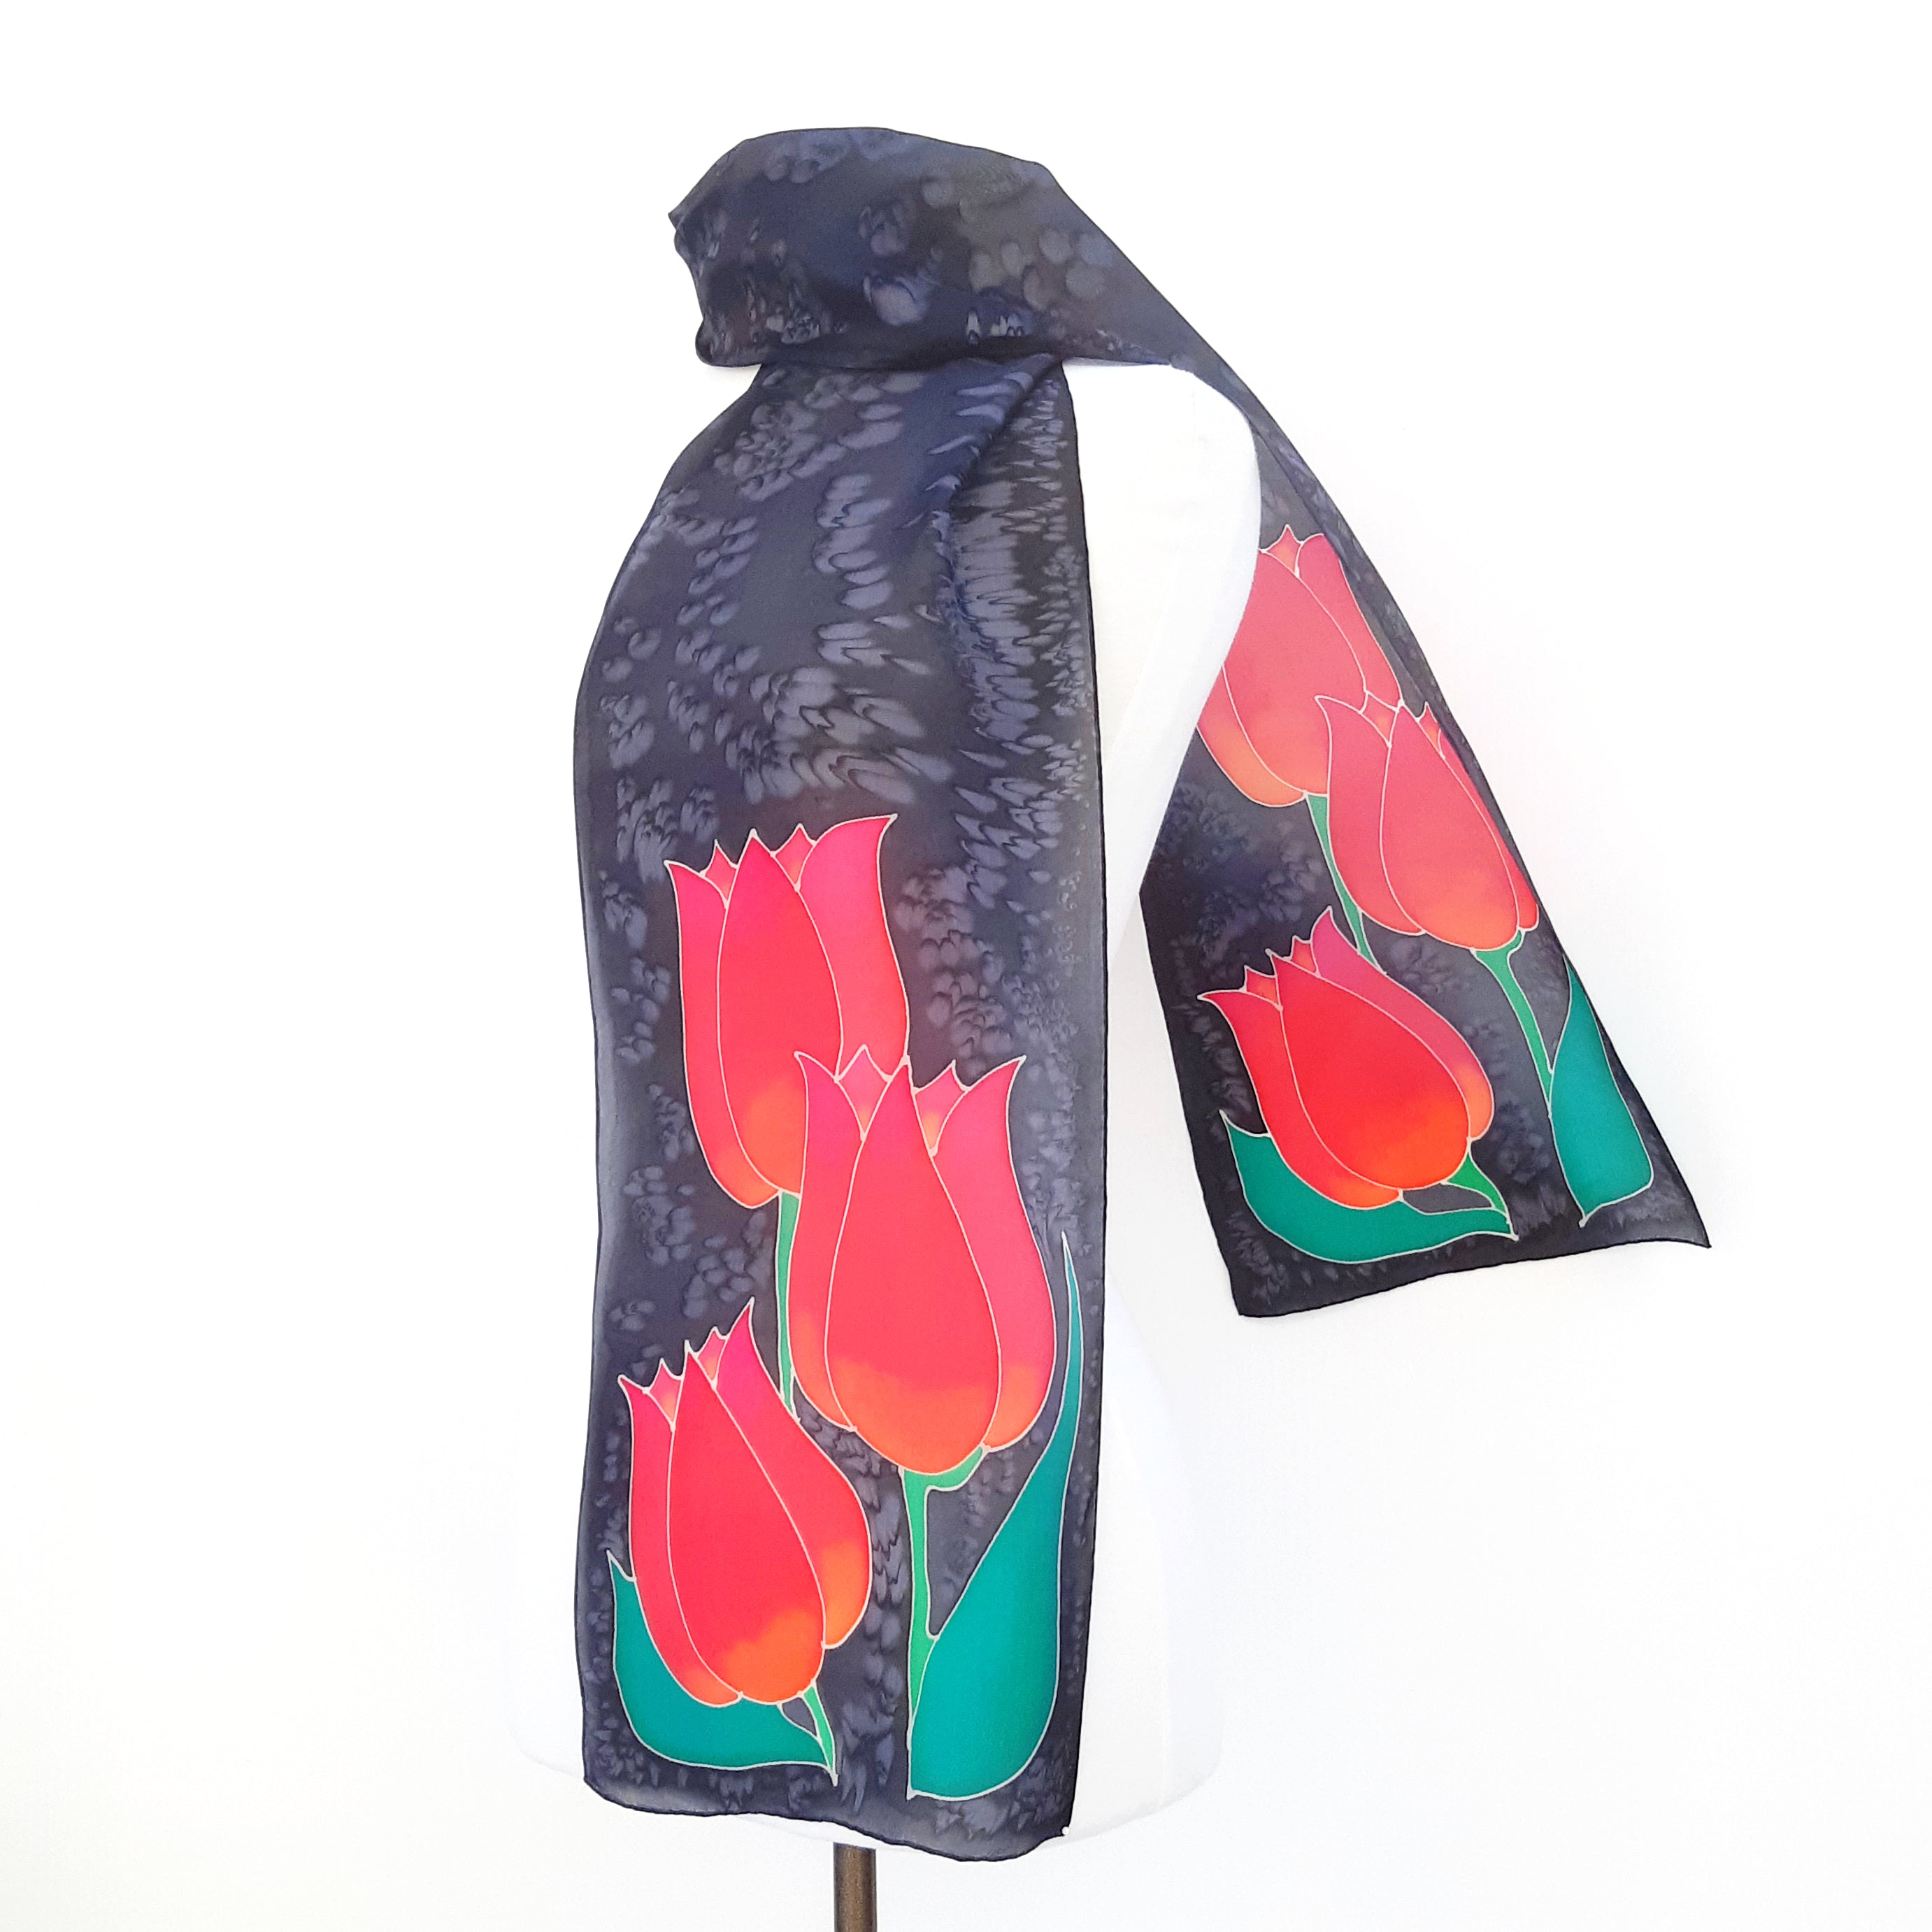 black silk scarf with red tulips art design hand painted by Lynne Kiel handmade in Canada